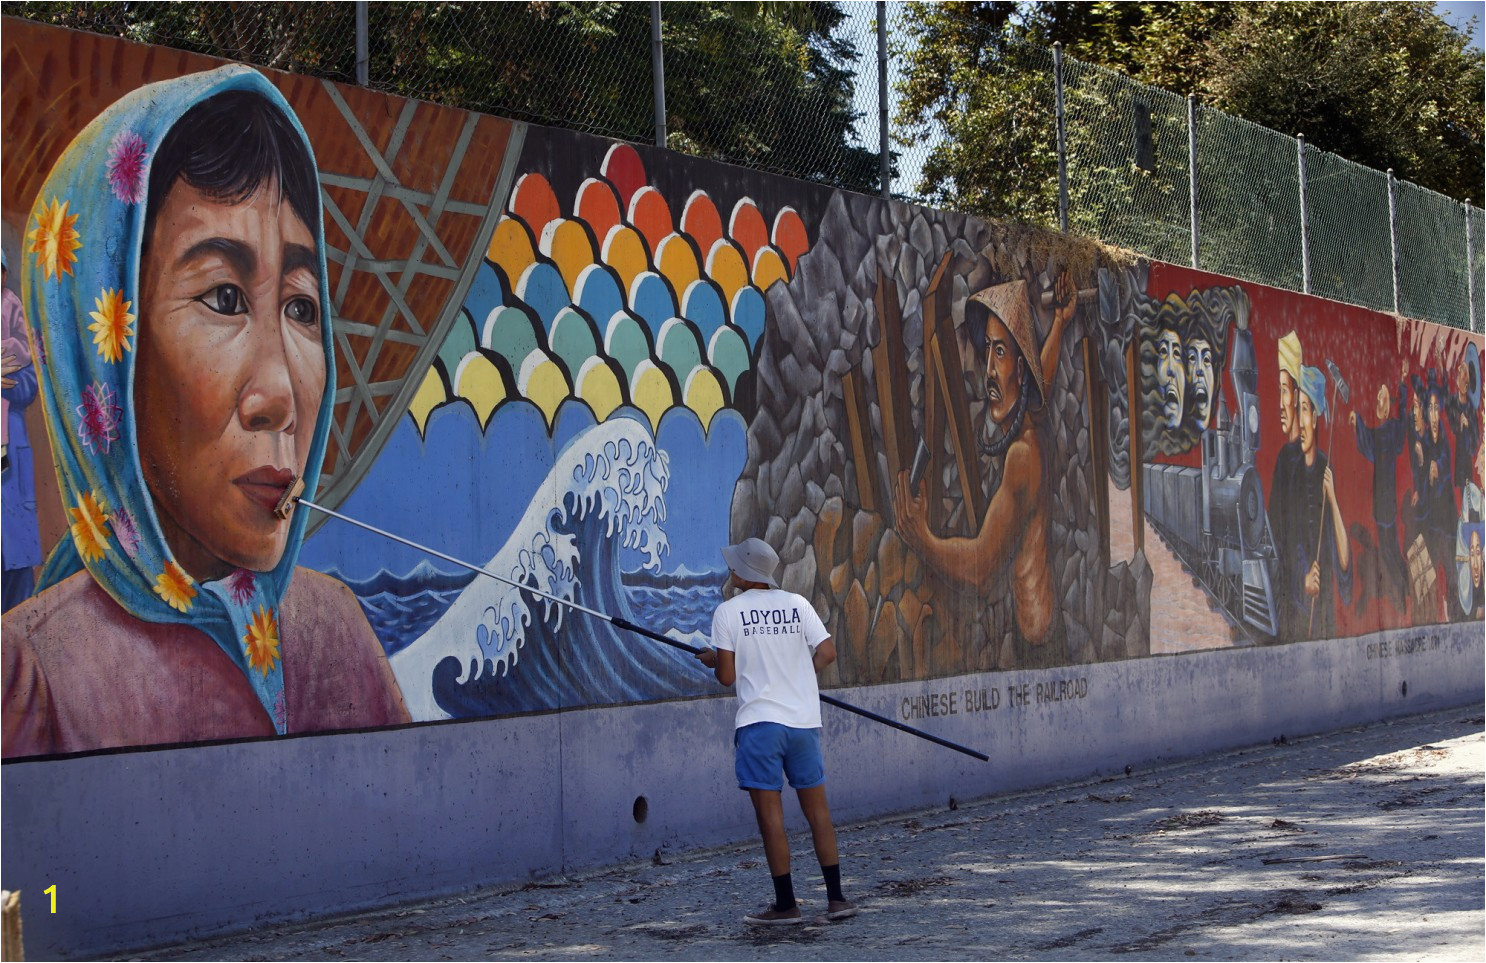 Great Wall Mural Los Angeles L A S Judith Baca Wins $50 000 Award Breaking Ground for